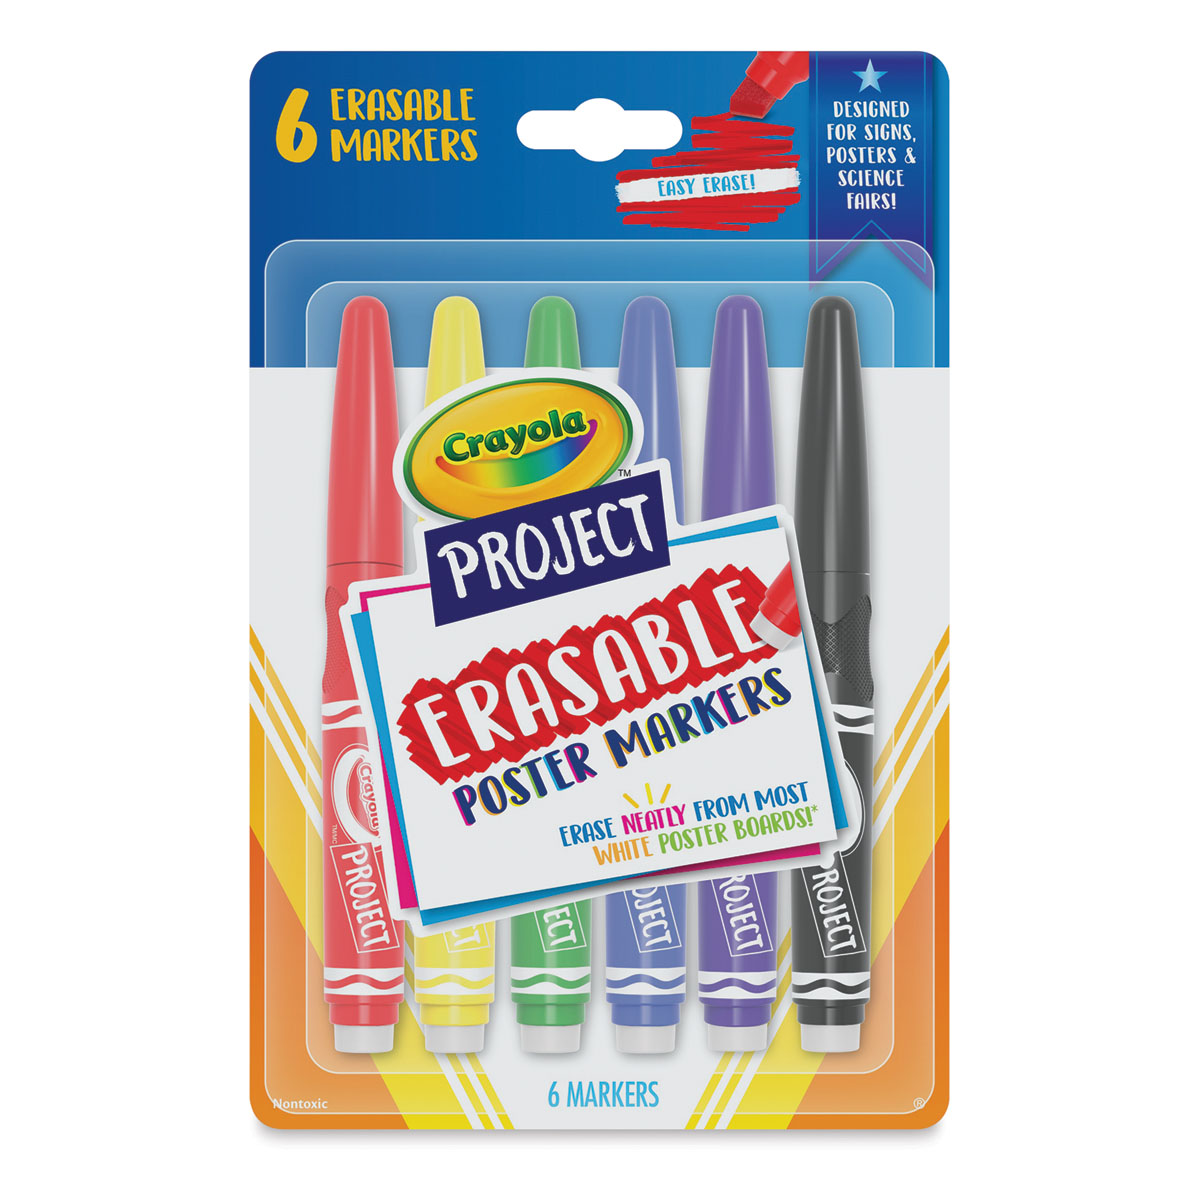 Crayola Take Note! Dry-Erase Wall Paint 20 Sq Ft Clear Residential Grade -  NEW